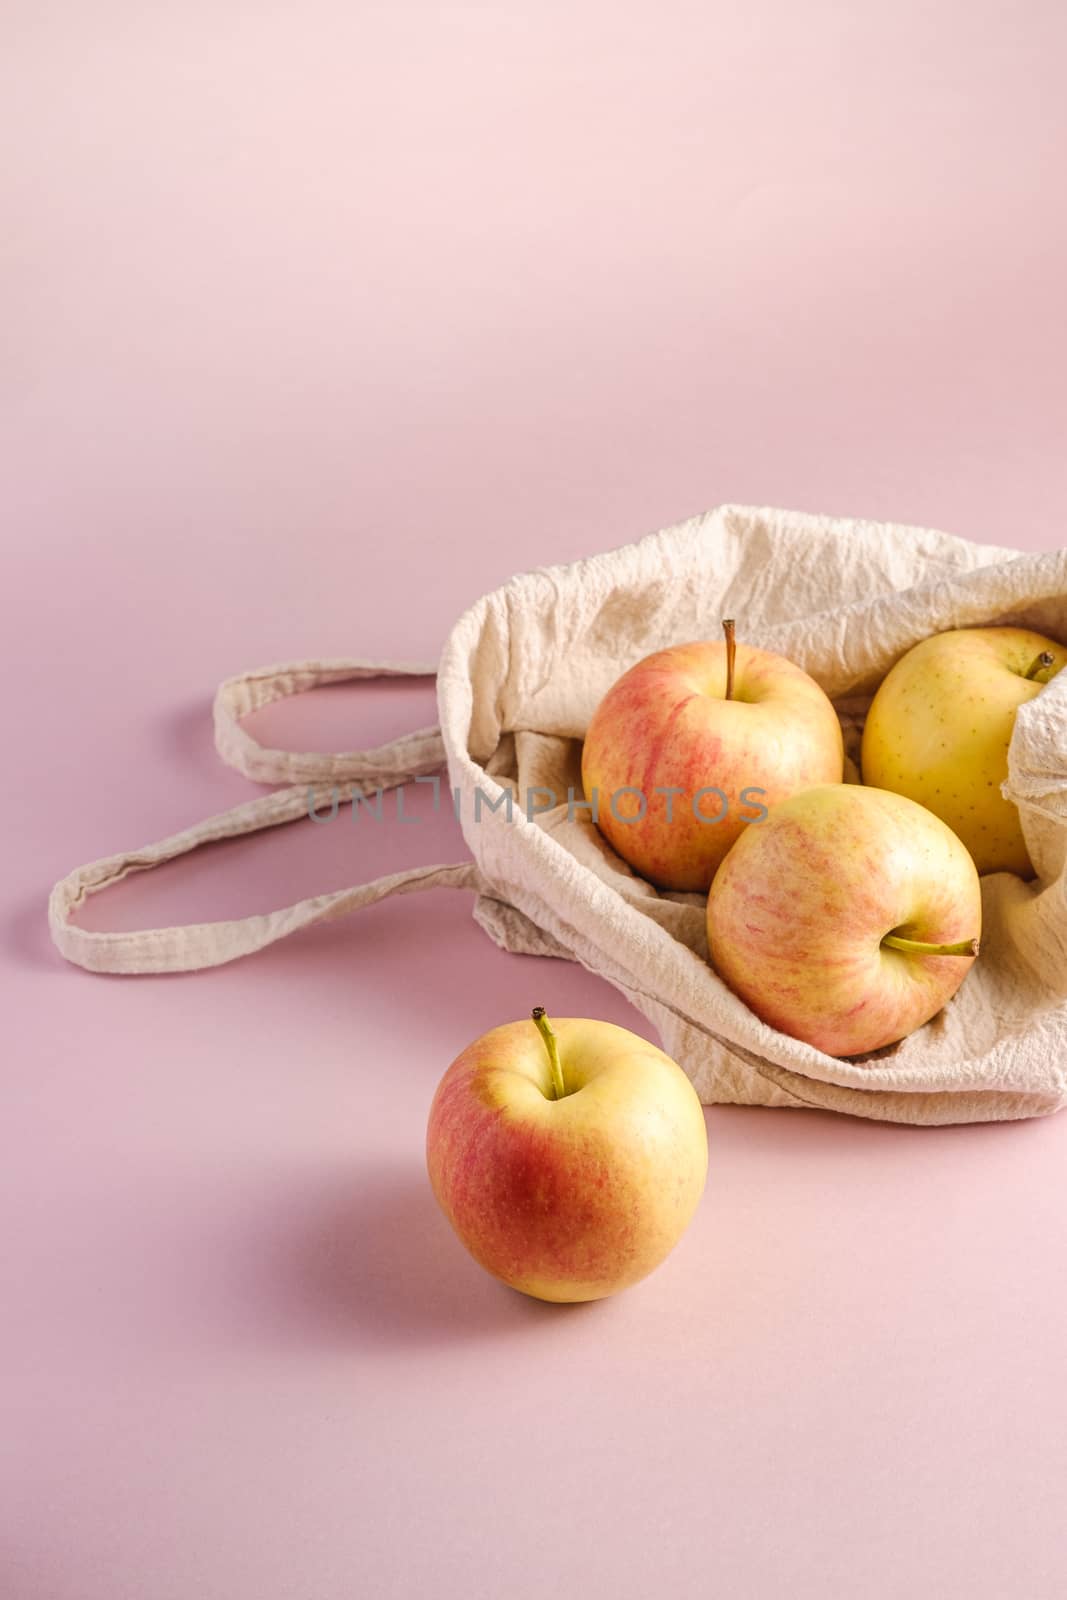 Fresh sweet apples in reusable textile grocery bag on pink background, angle view